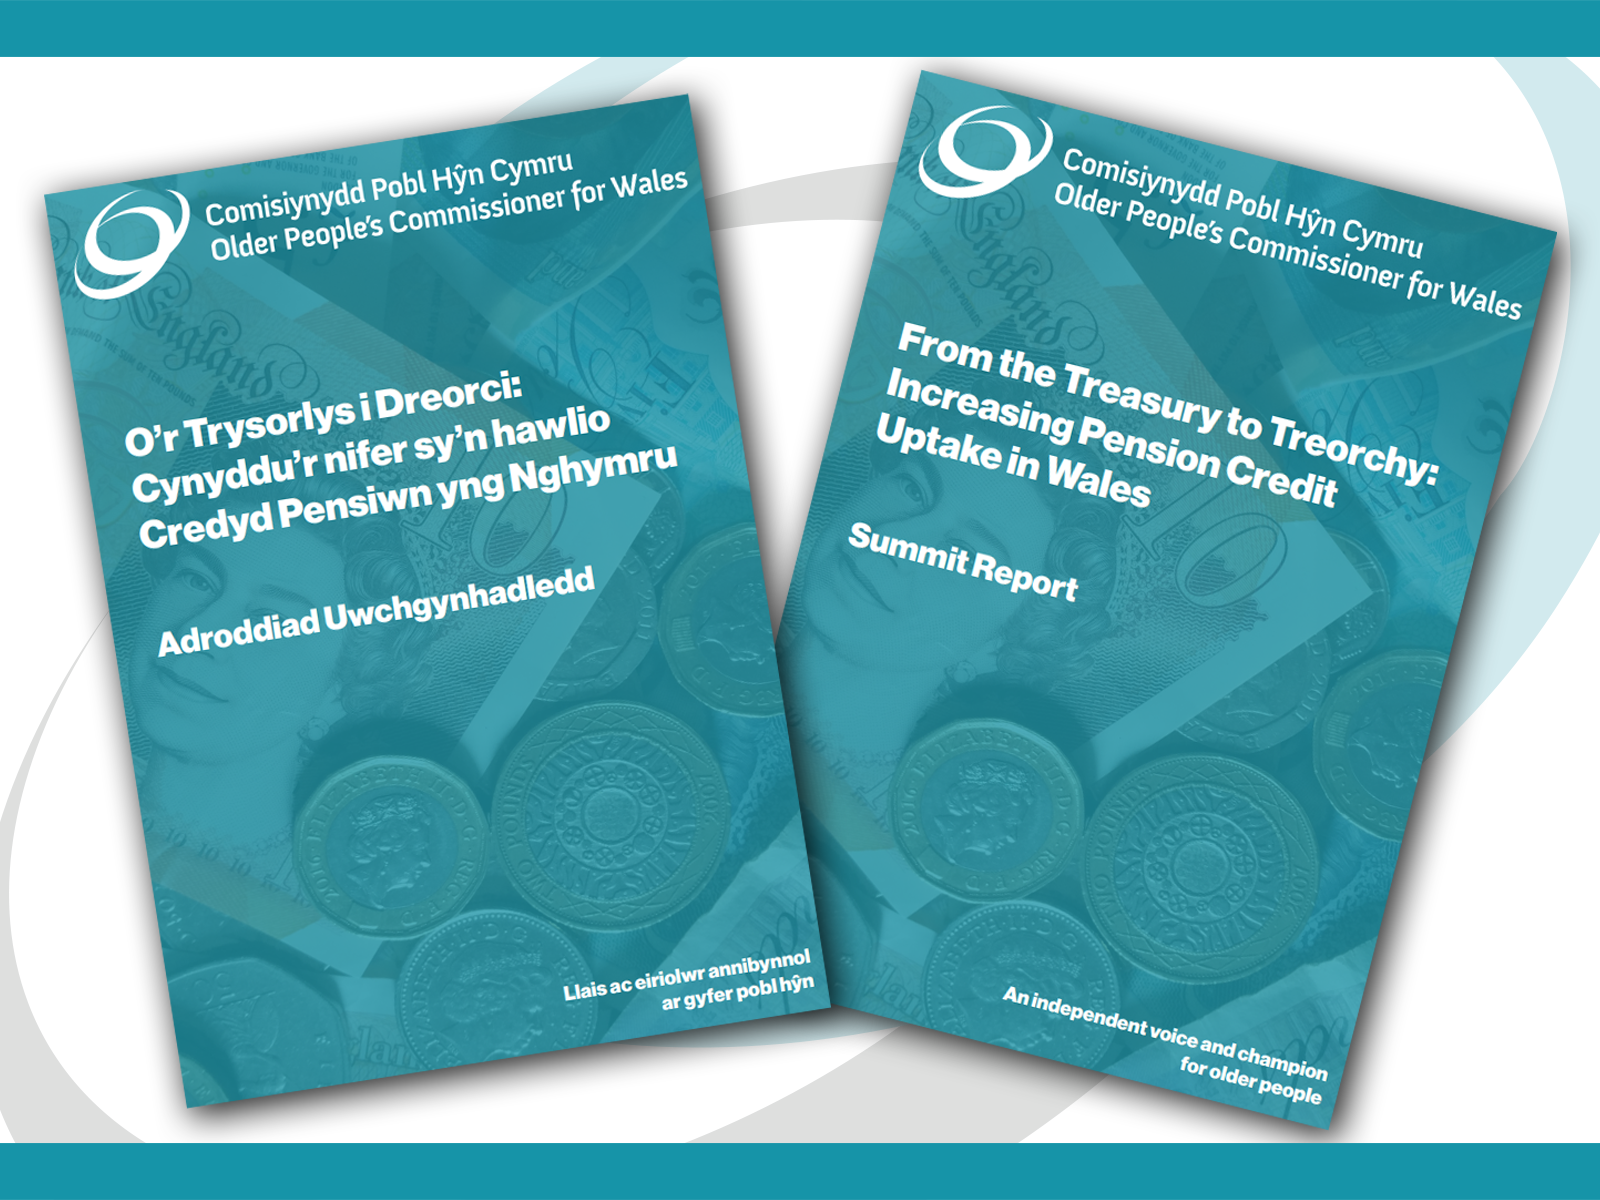 Front covers of the Commissioner's report on Pension Credit Uptake in Wales in both English and Welsh